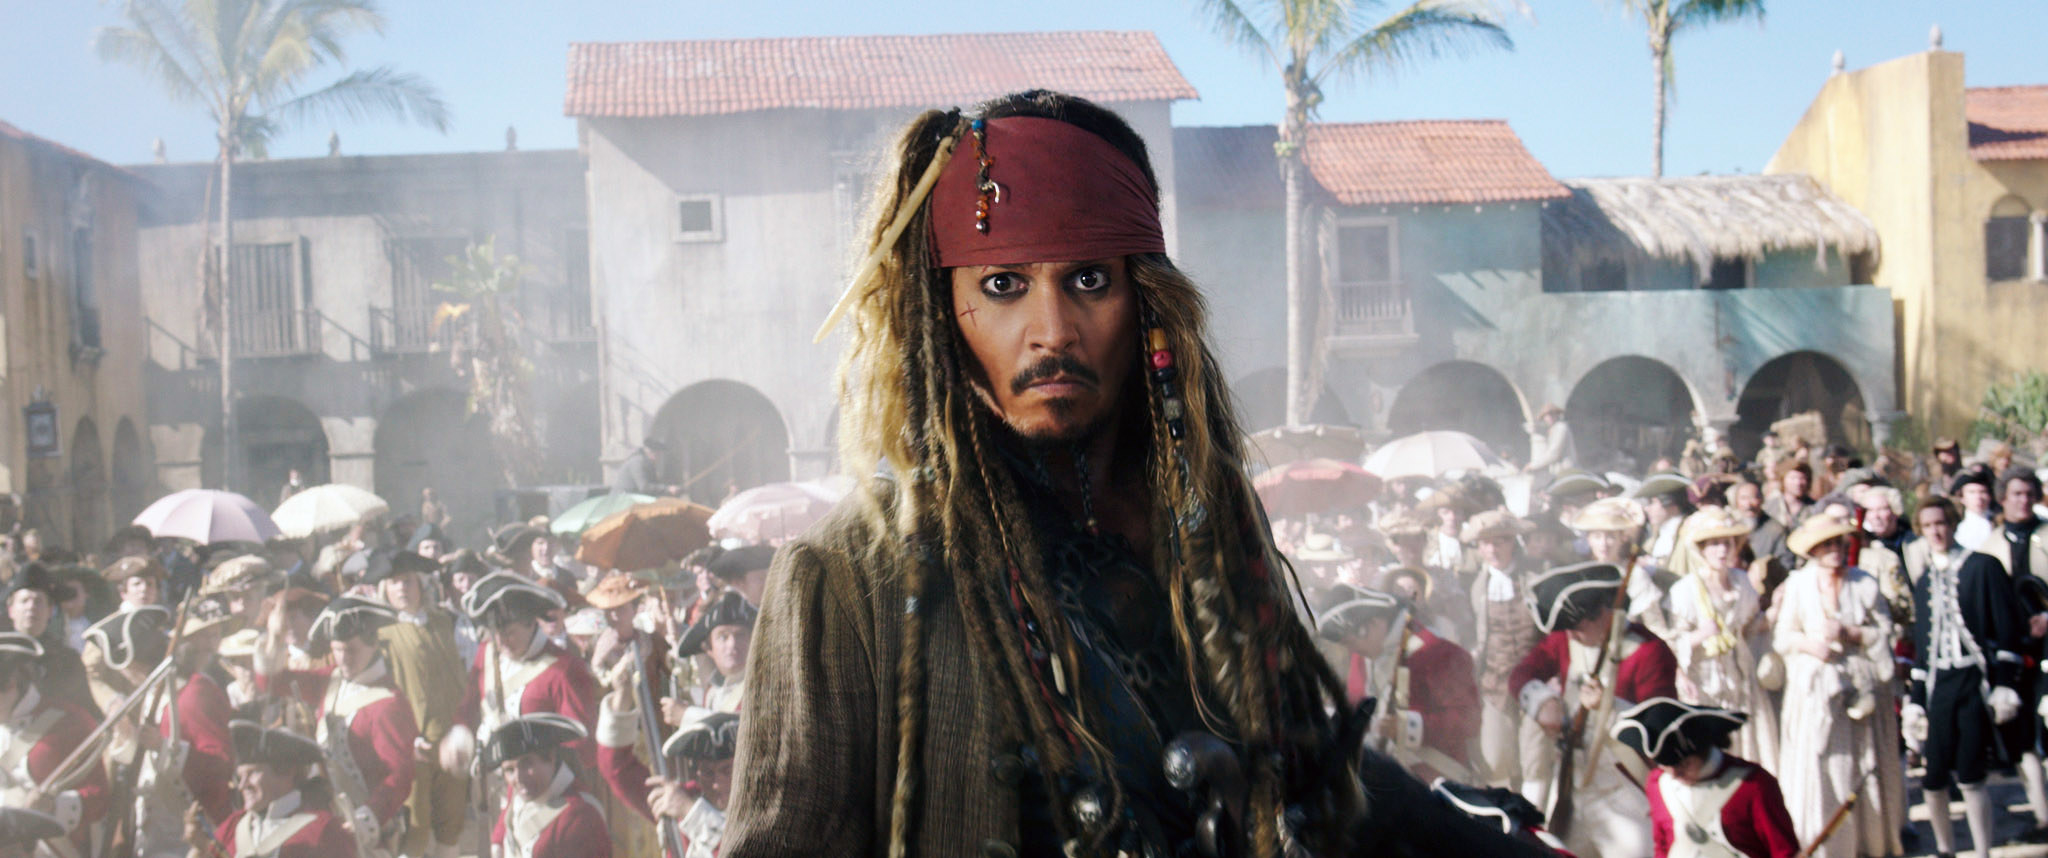 Jack Sparrow in front of a crowd of soldiers